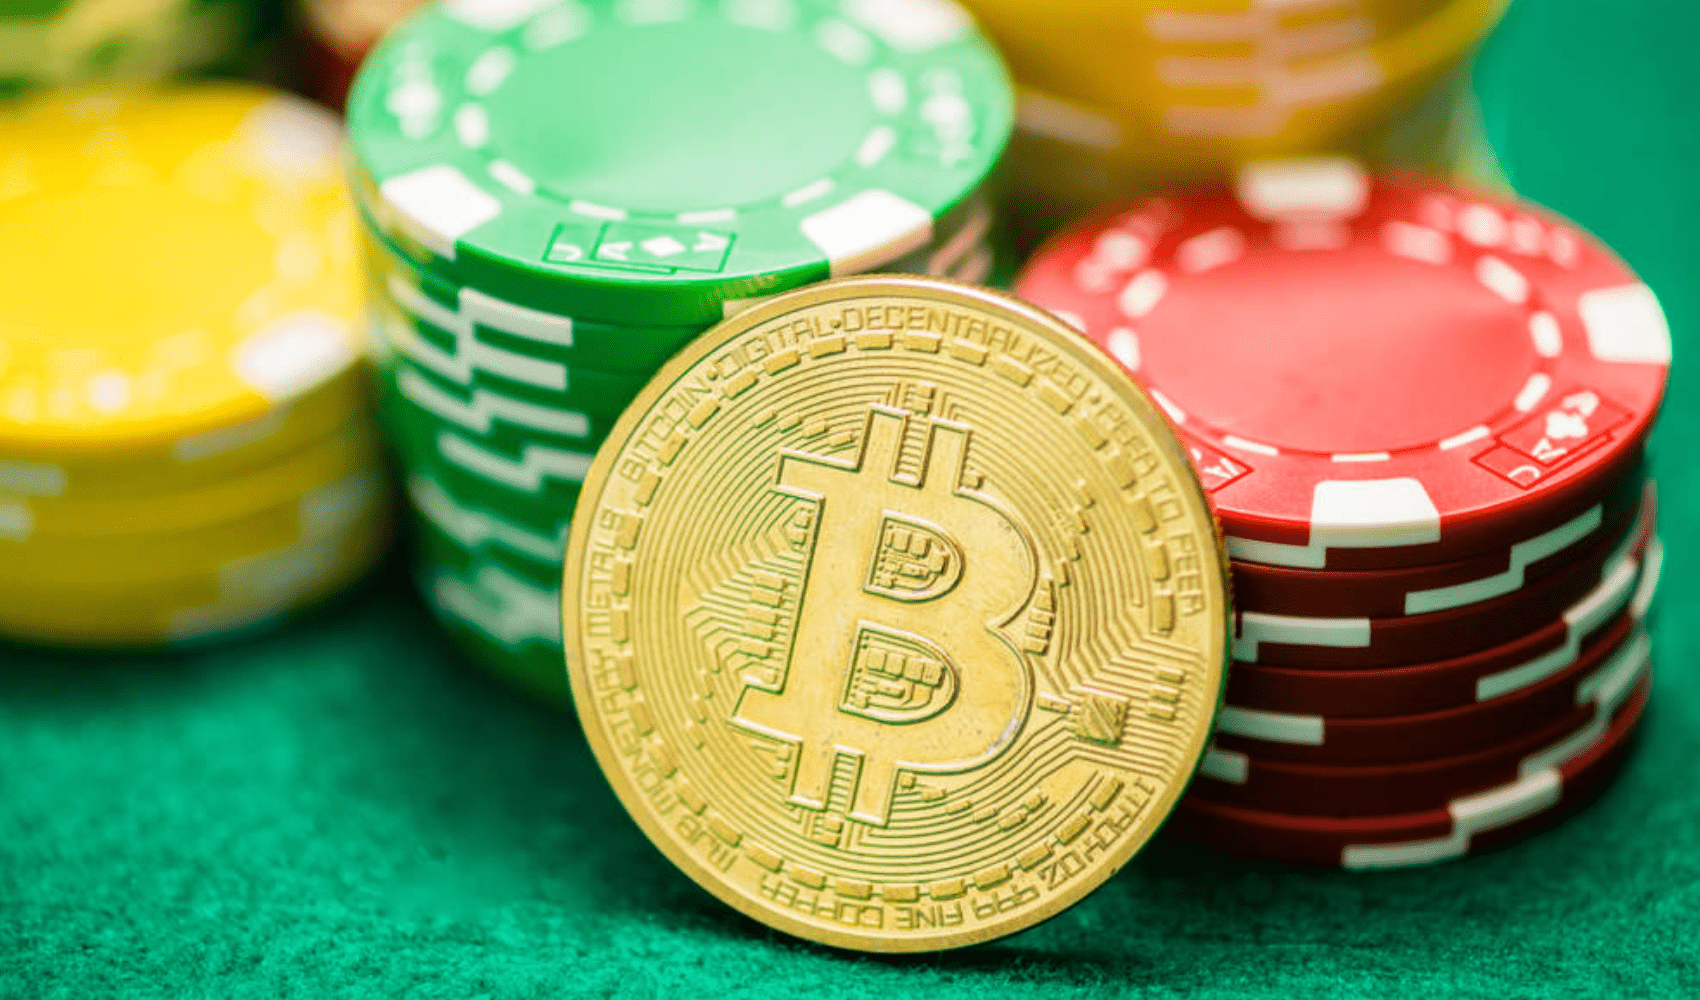 Why best btc casinos Is The Only Skill You Really Need